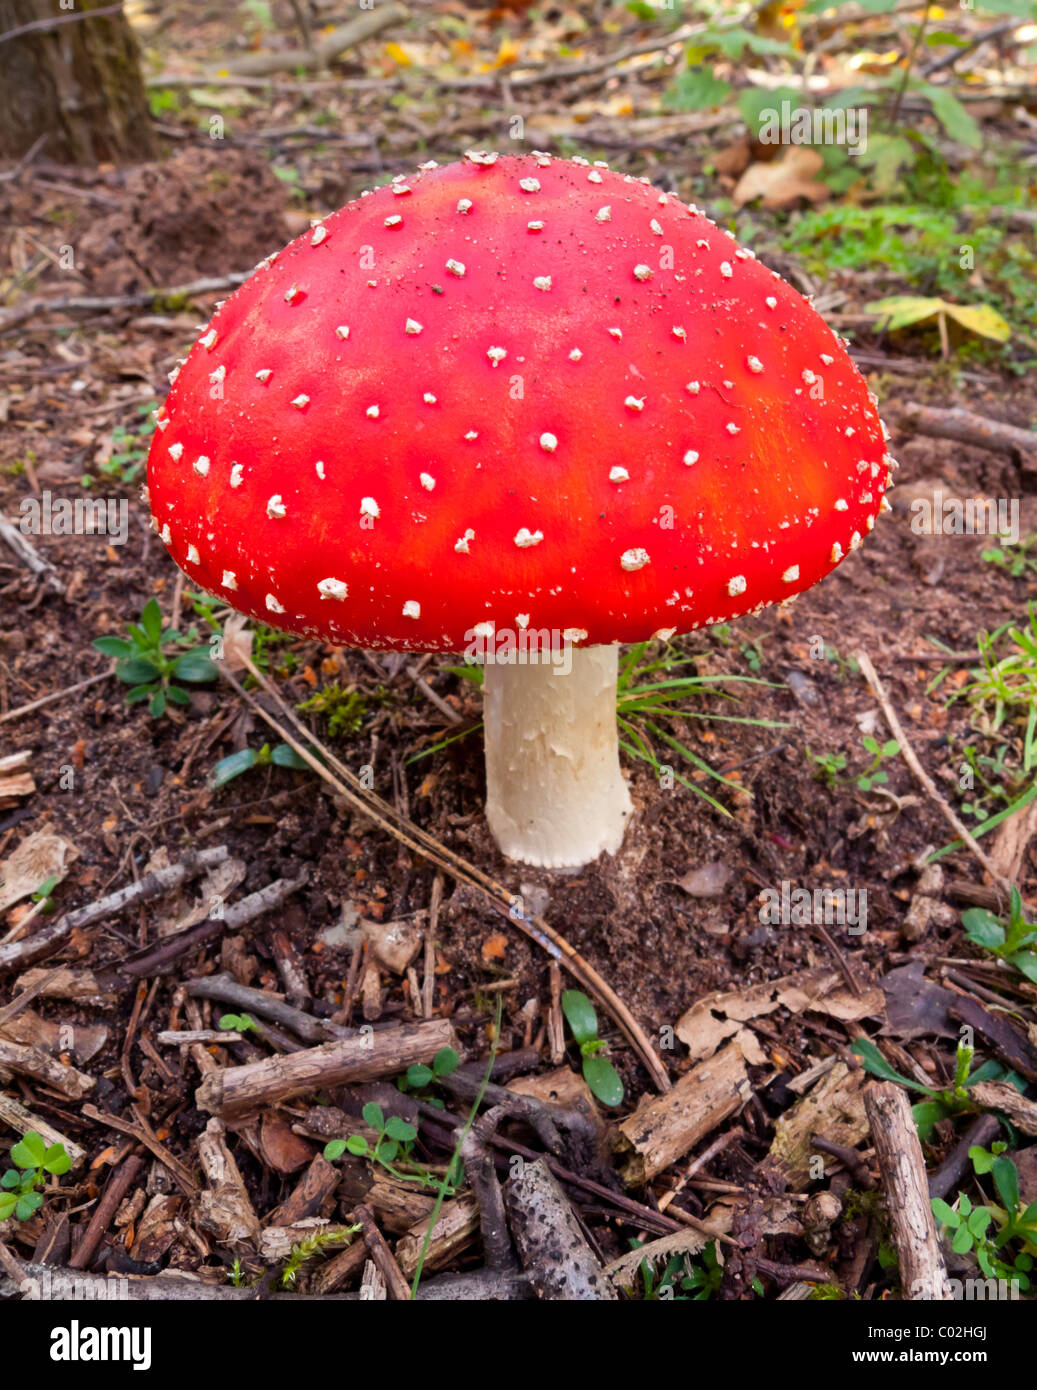 Amanita muscaria, commonly known as the fly agaric toadstool a poisonous and psychoactive basidiomycete fungus Stock Photo